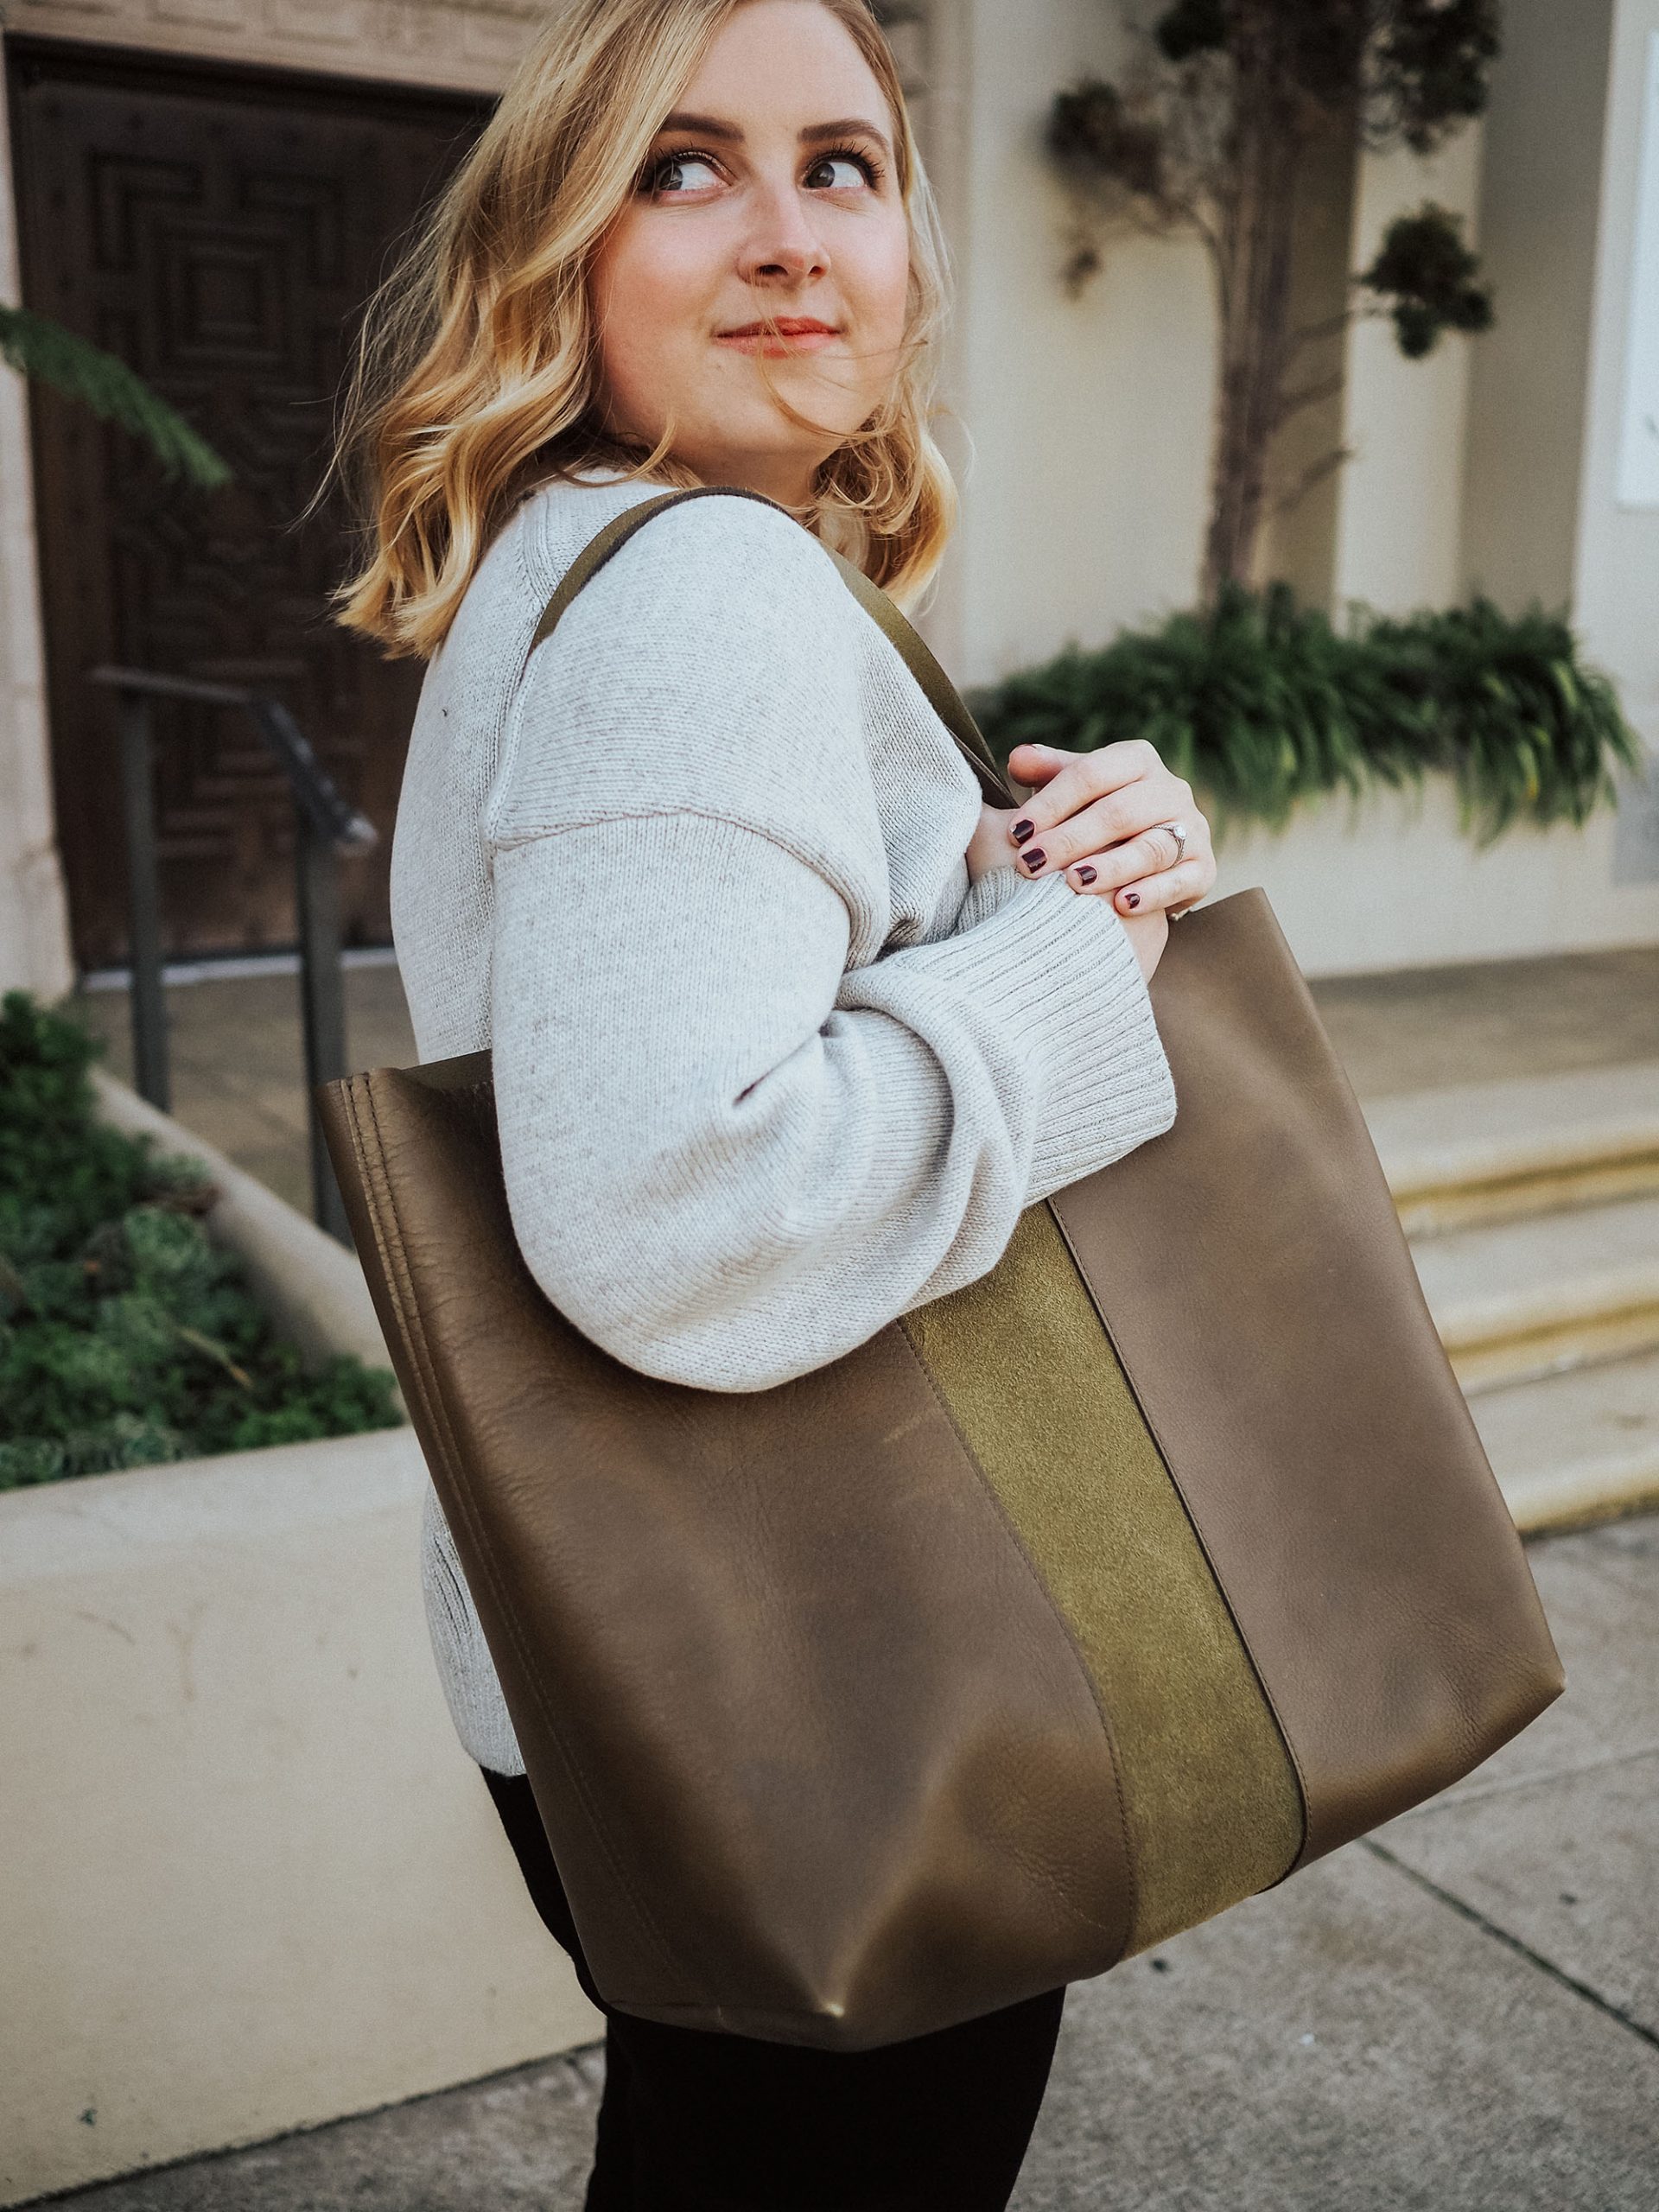 Cuyana Brand Review + Top Picks From the Brand - by Kelsey Boyanzhu